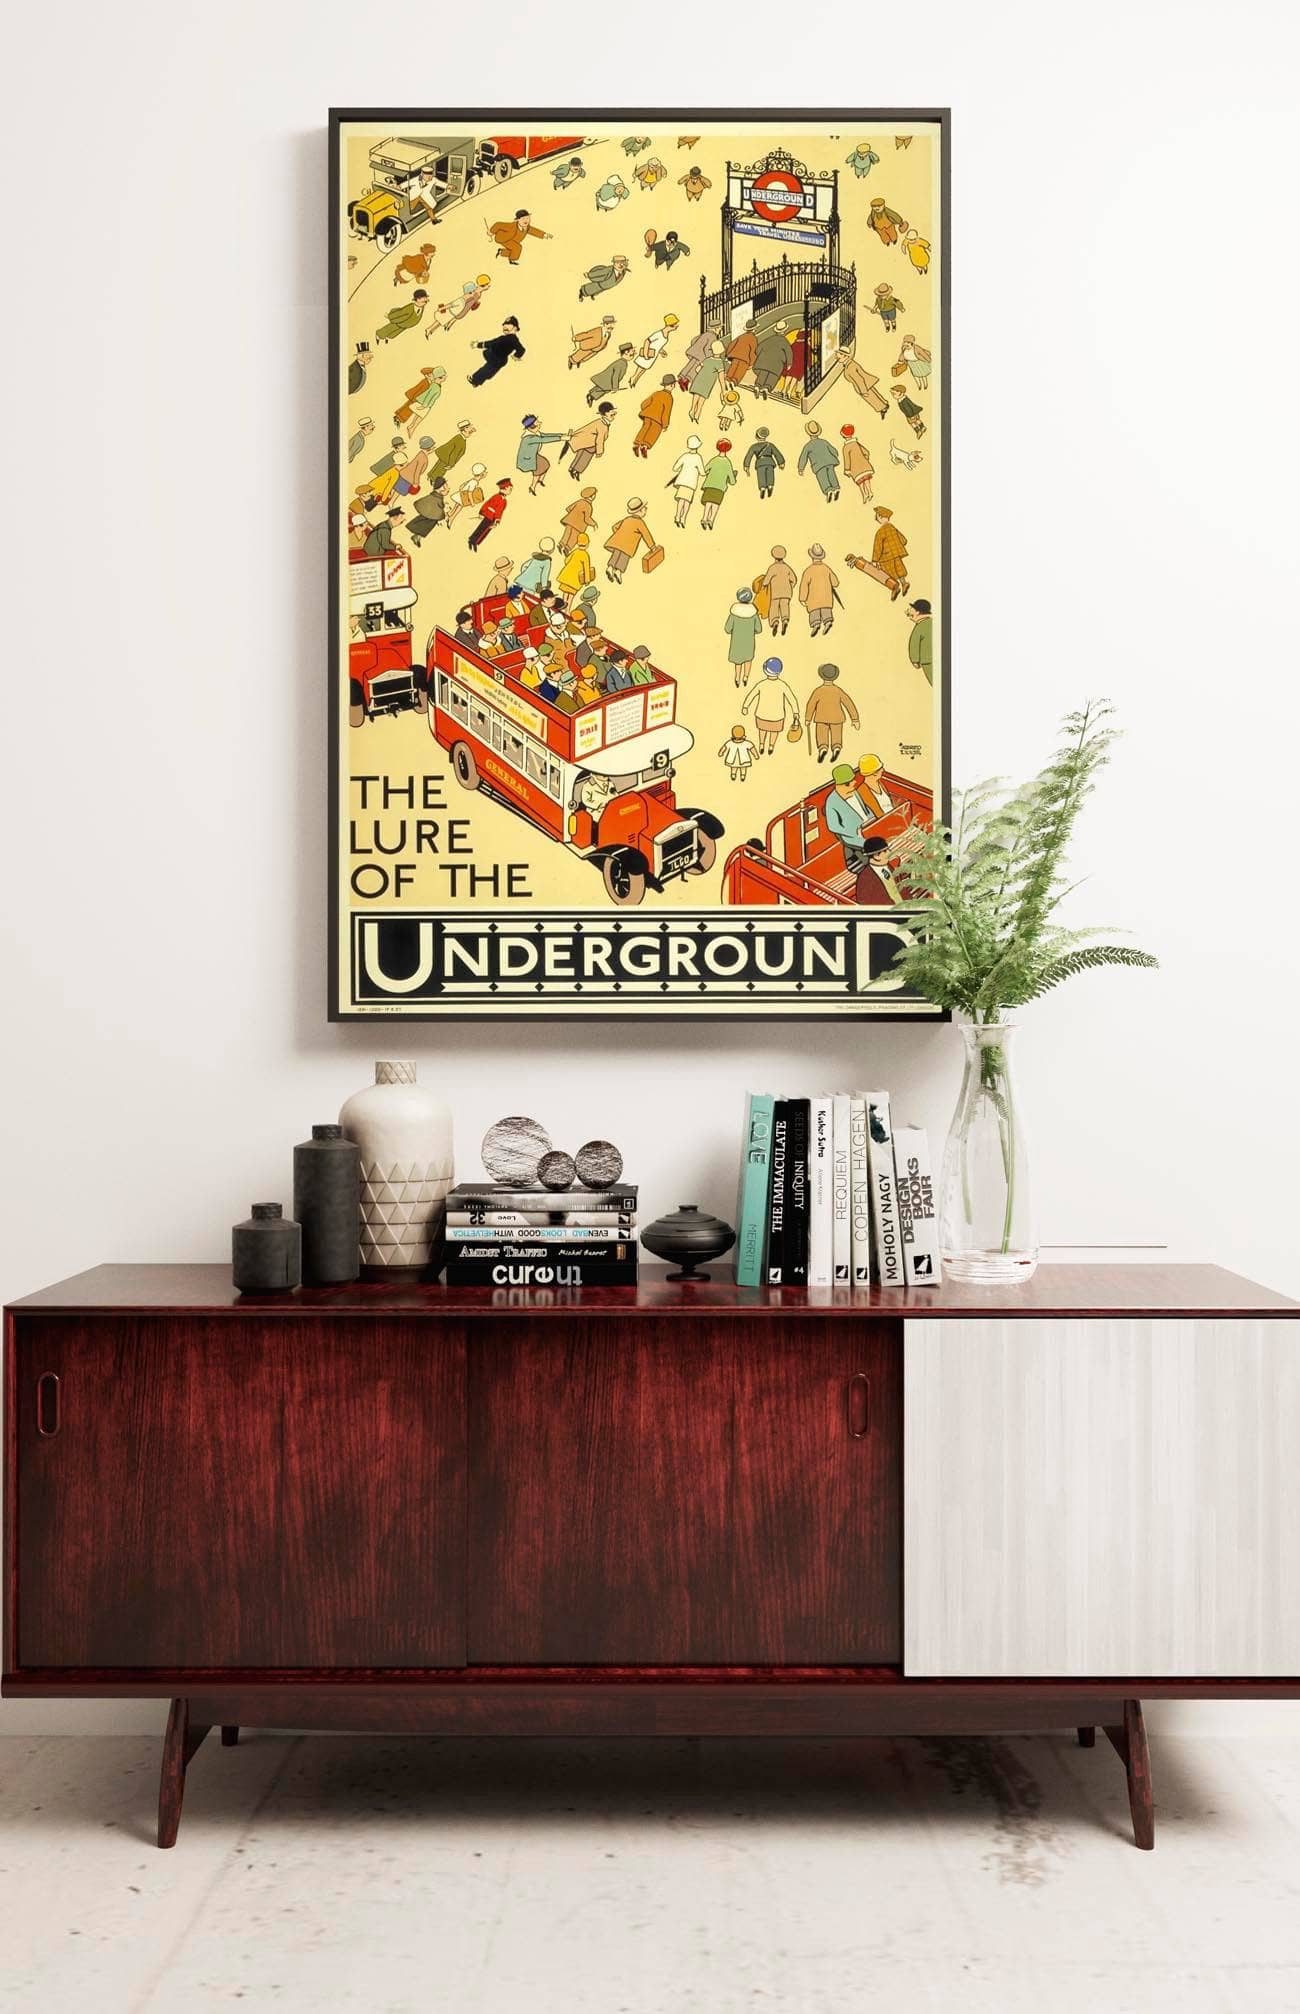 The lure of the Underground Print from Truly Art